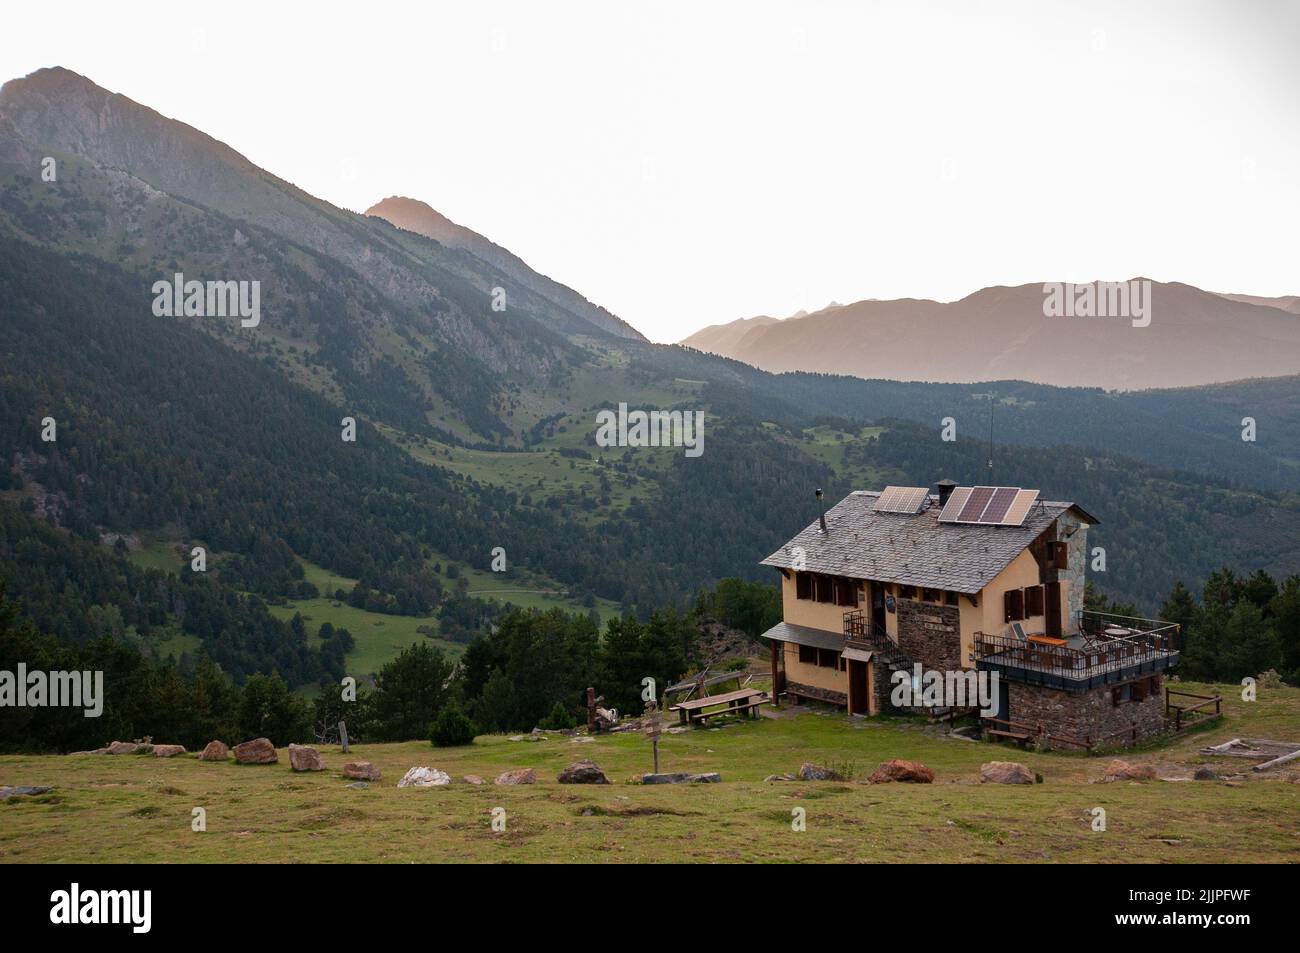 A lone house at a remote area surrounded by mountains Stock Photo